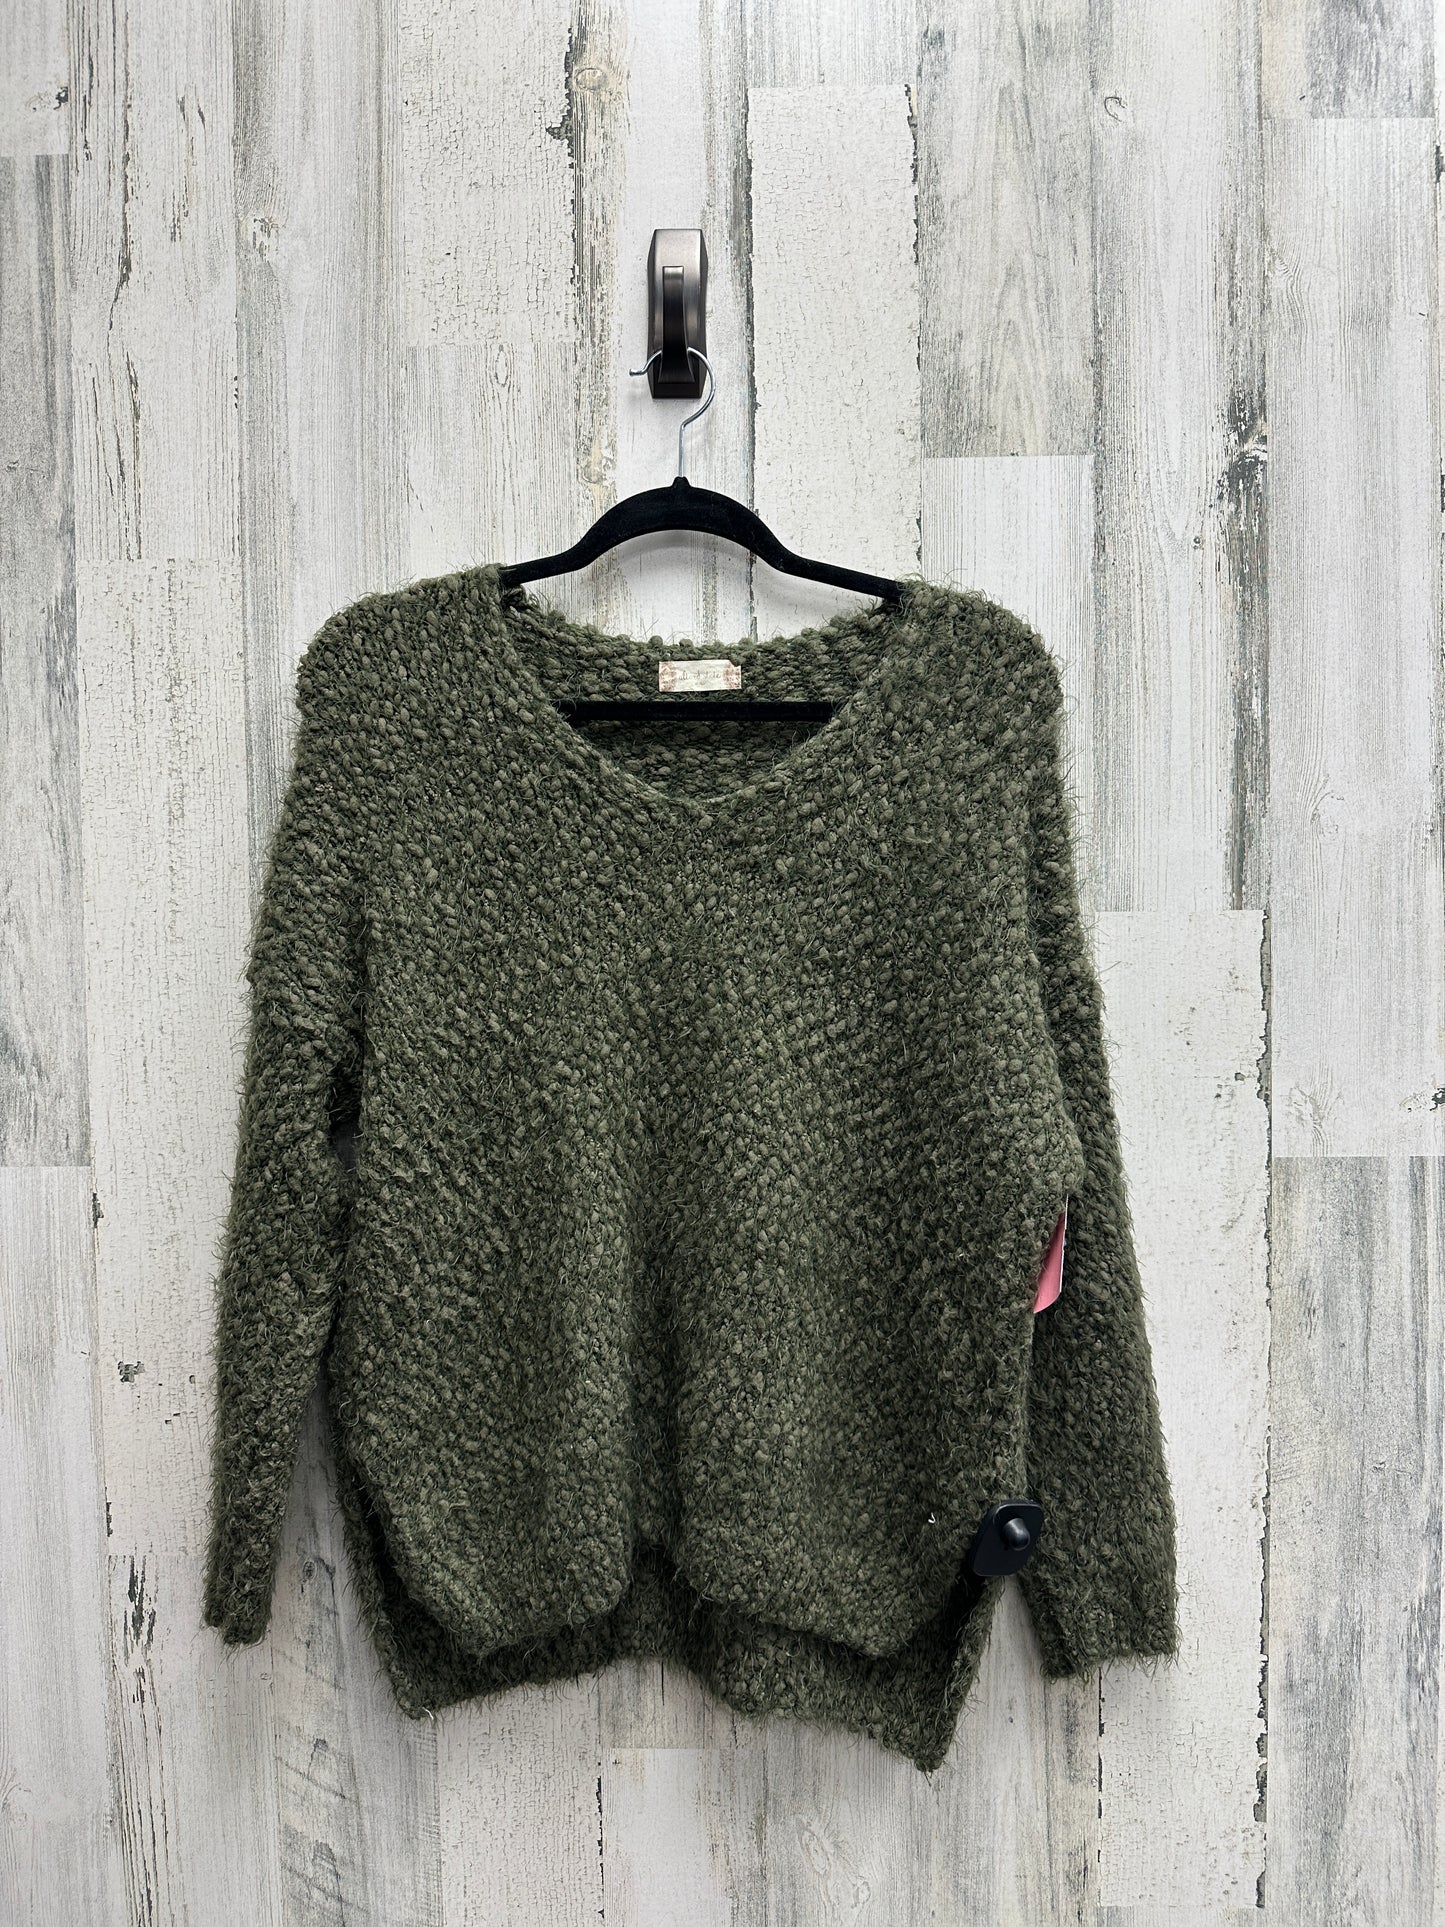 Sweater By Altard State  Size: S